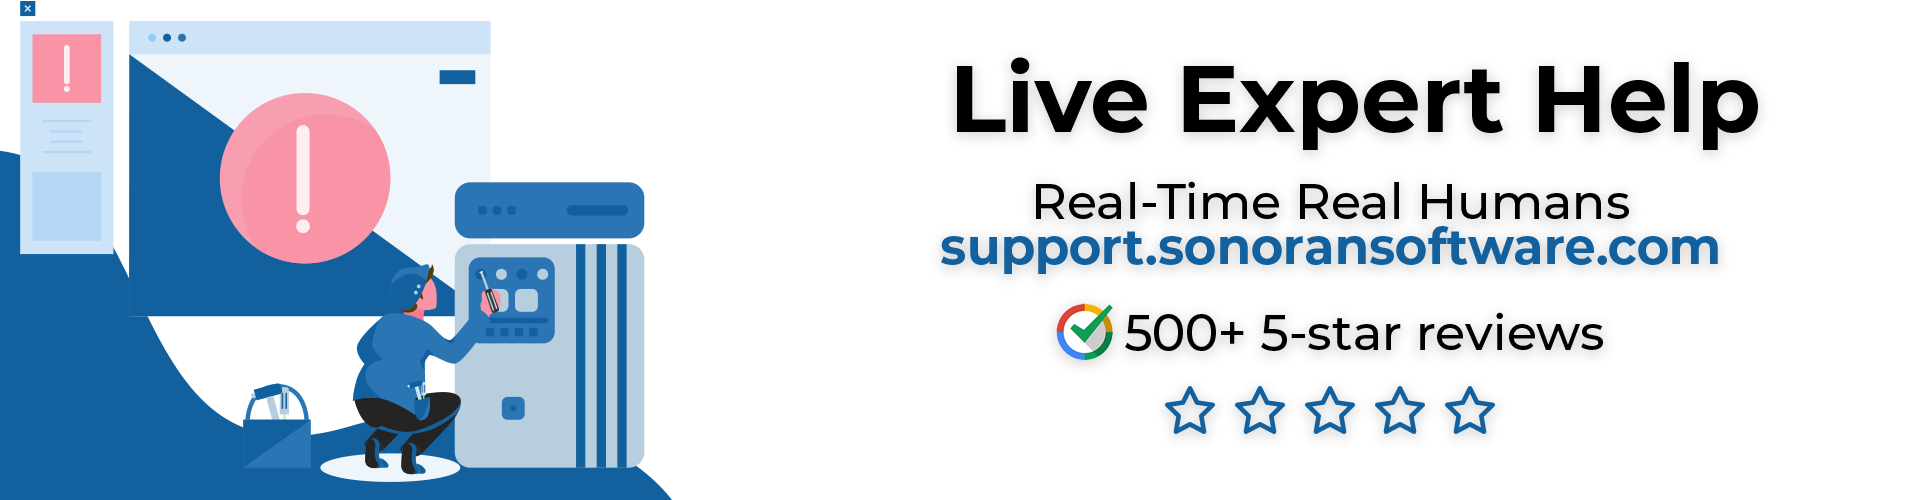 Sonoran Software offers excellent support 7 days a week that has over 500 5-star reviews on Google. Rely on us to be there when you need assistance.